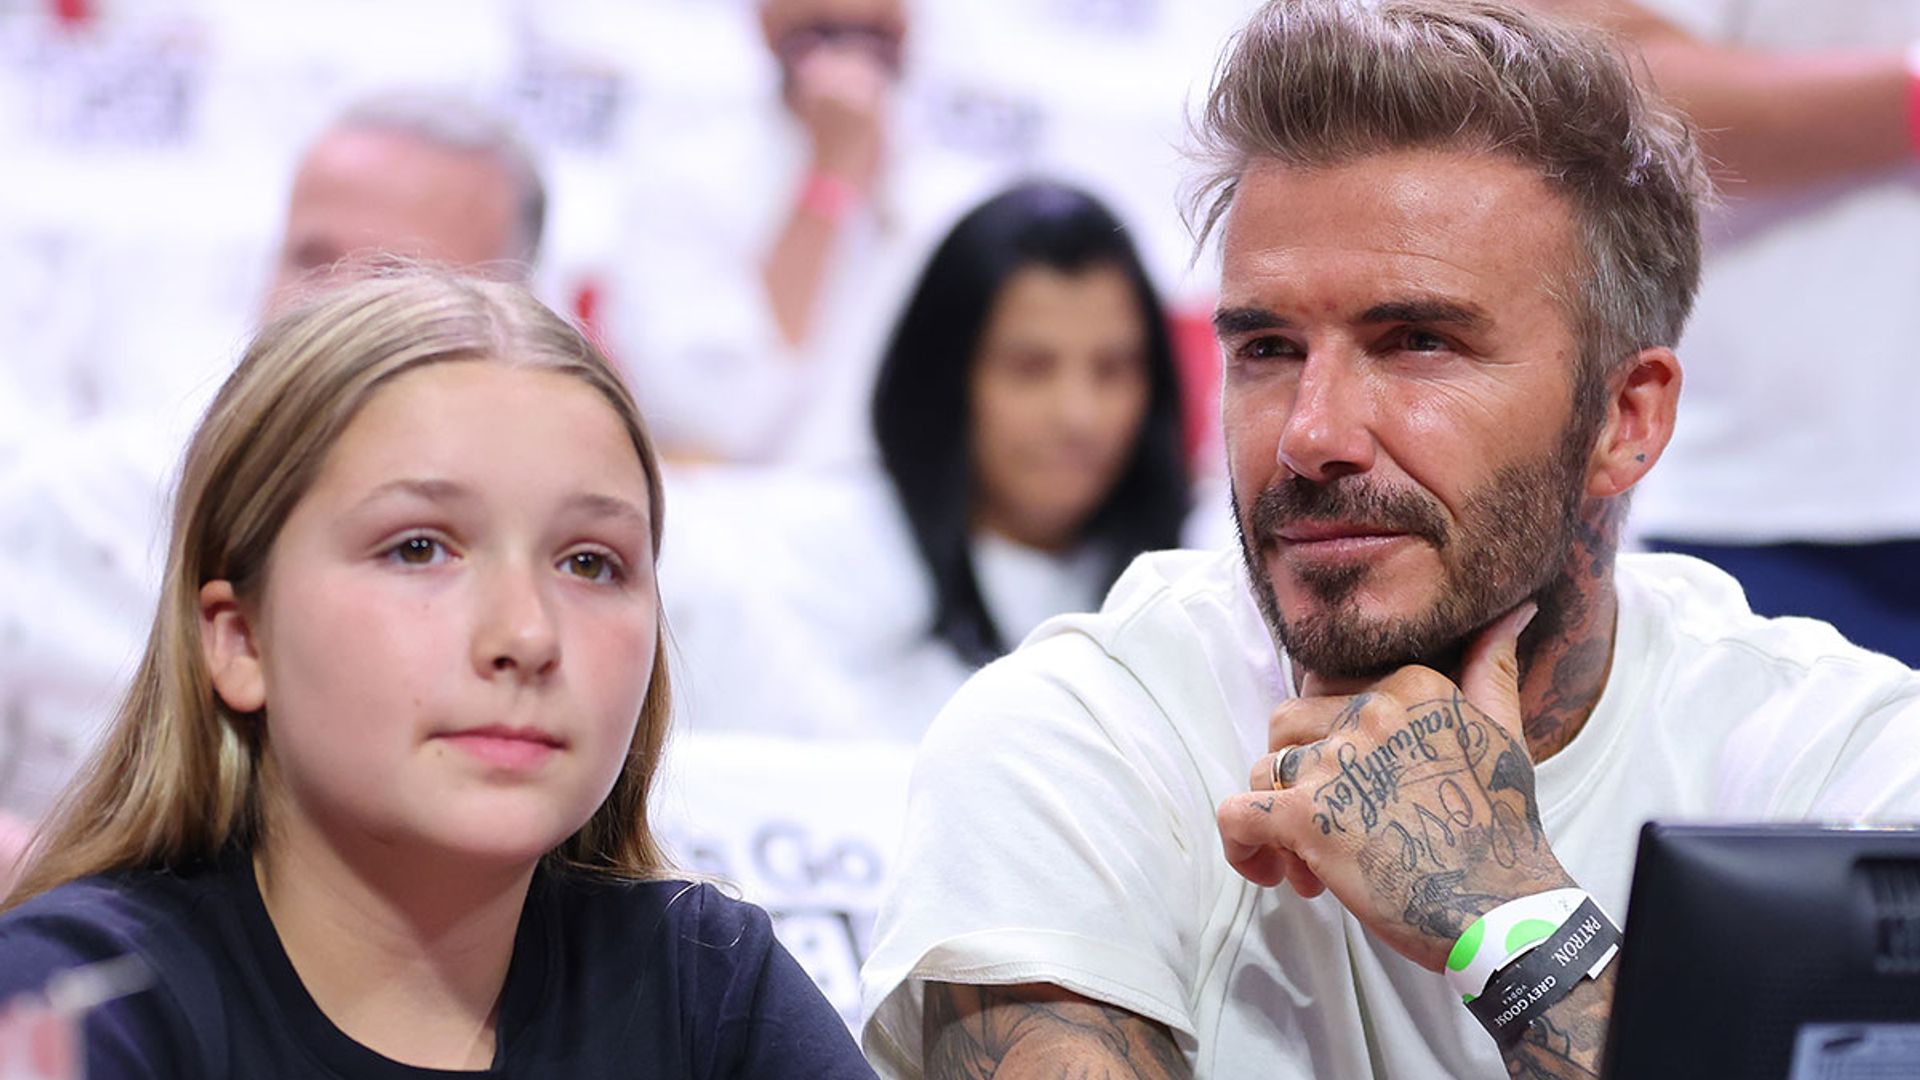 David Beckham shows off daughter Harper's humorous side with funny handwritten note